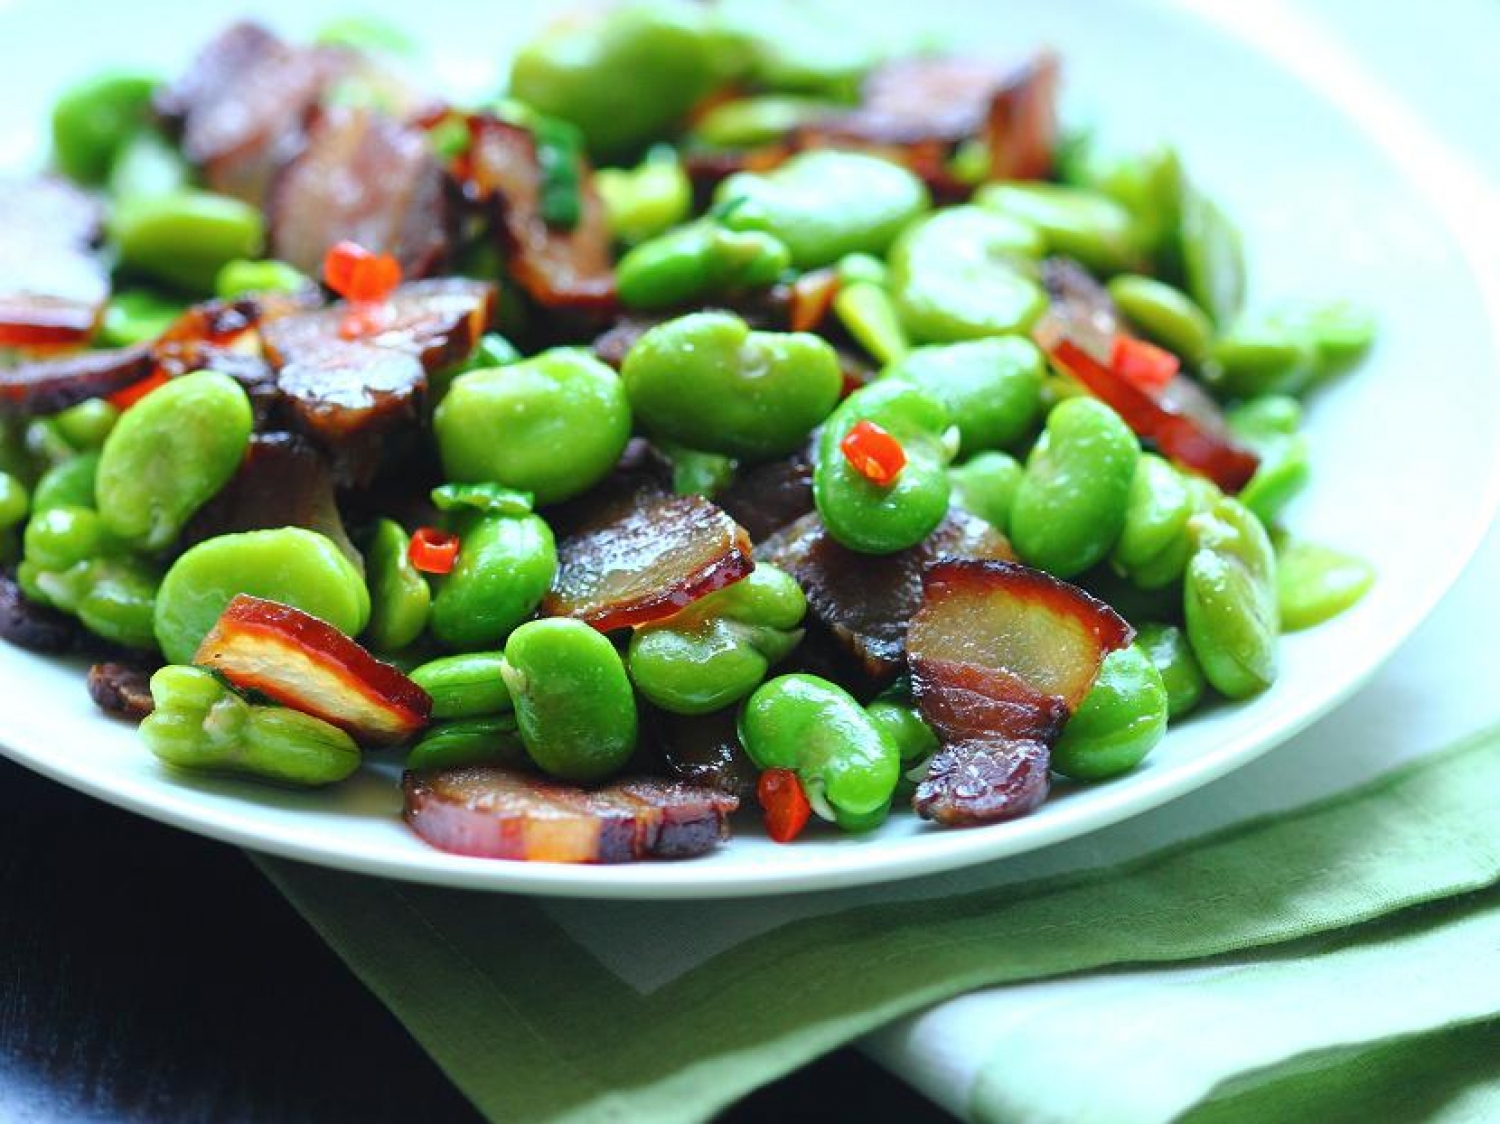 <p>Fava beans take on the most delish spicy, smoky flavors with this Chinese-style stir fry you'll want to make again and again. All you need are 6 ingredients, including Chinese bacon made from marinated, dried pork belly (cue drooling now). <a href="https://soyricefire.com/2013/05/19/stir-fried-fava-beans-with-chinese-bacon/" rel="noopener">Get the recipe here.</a></p>